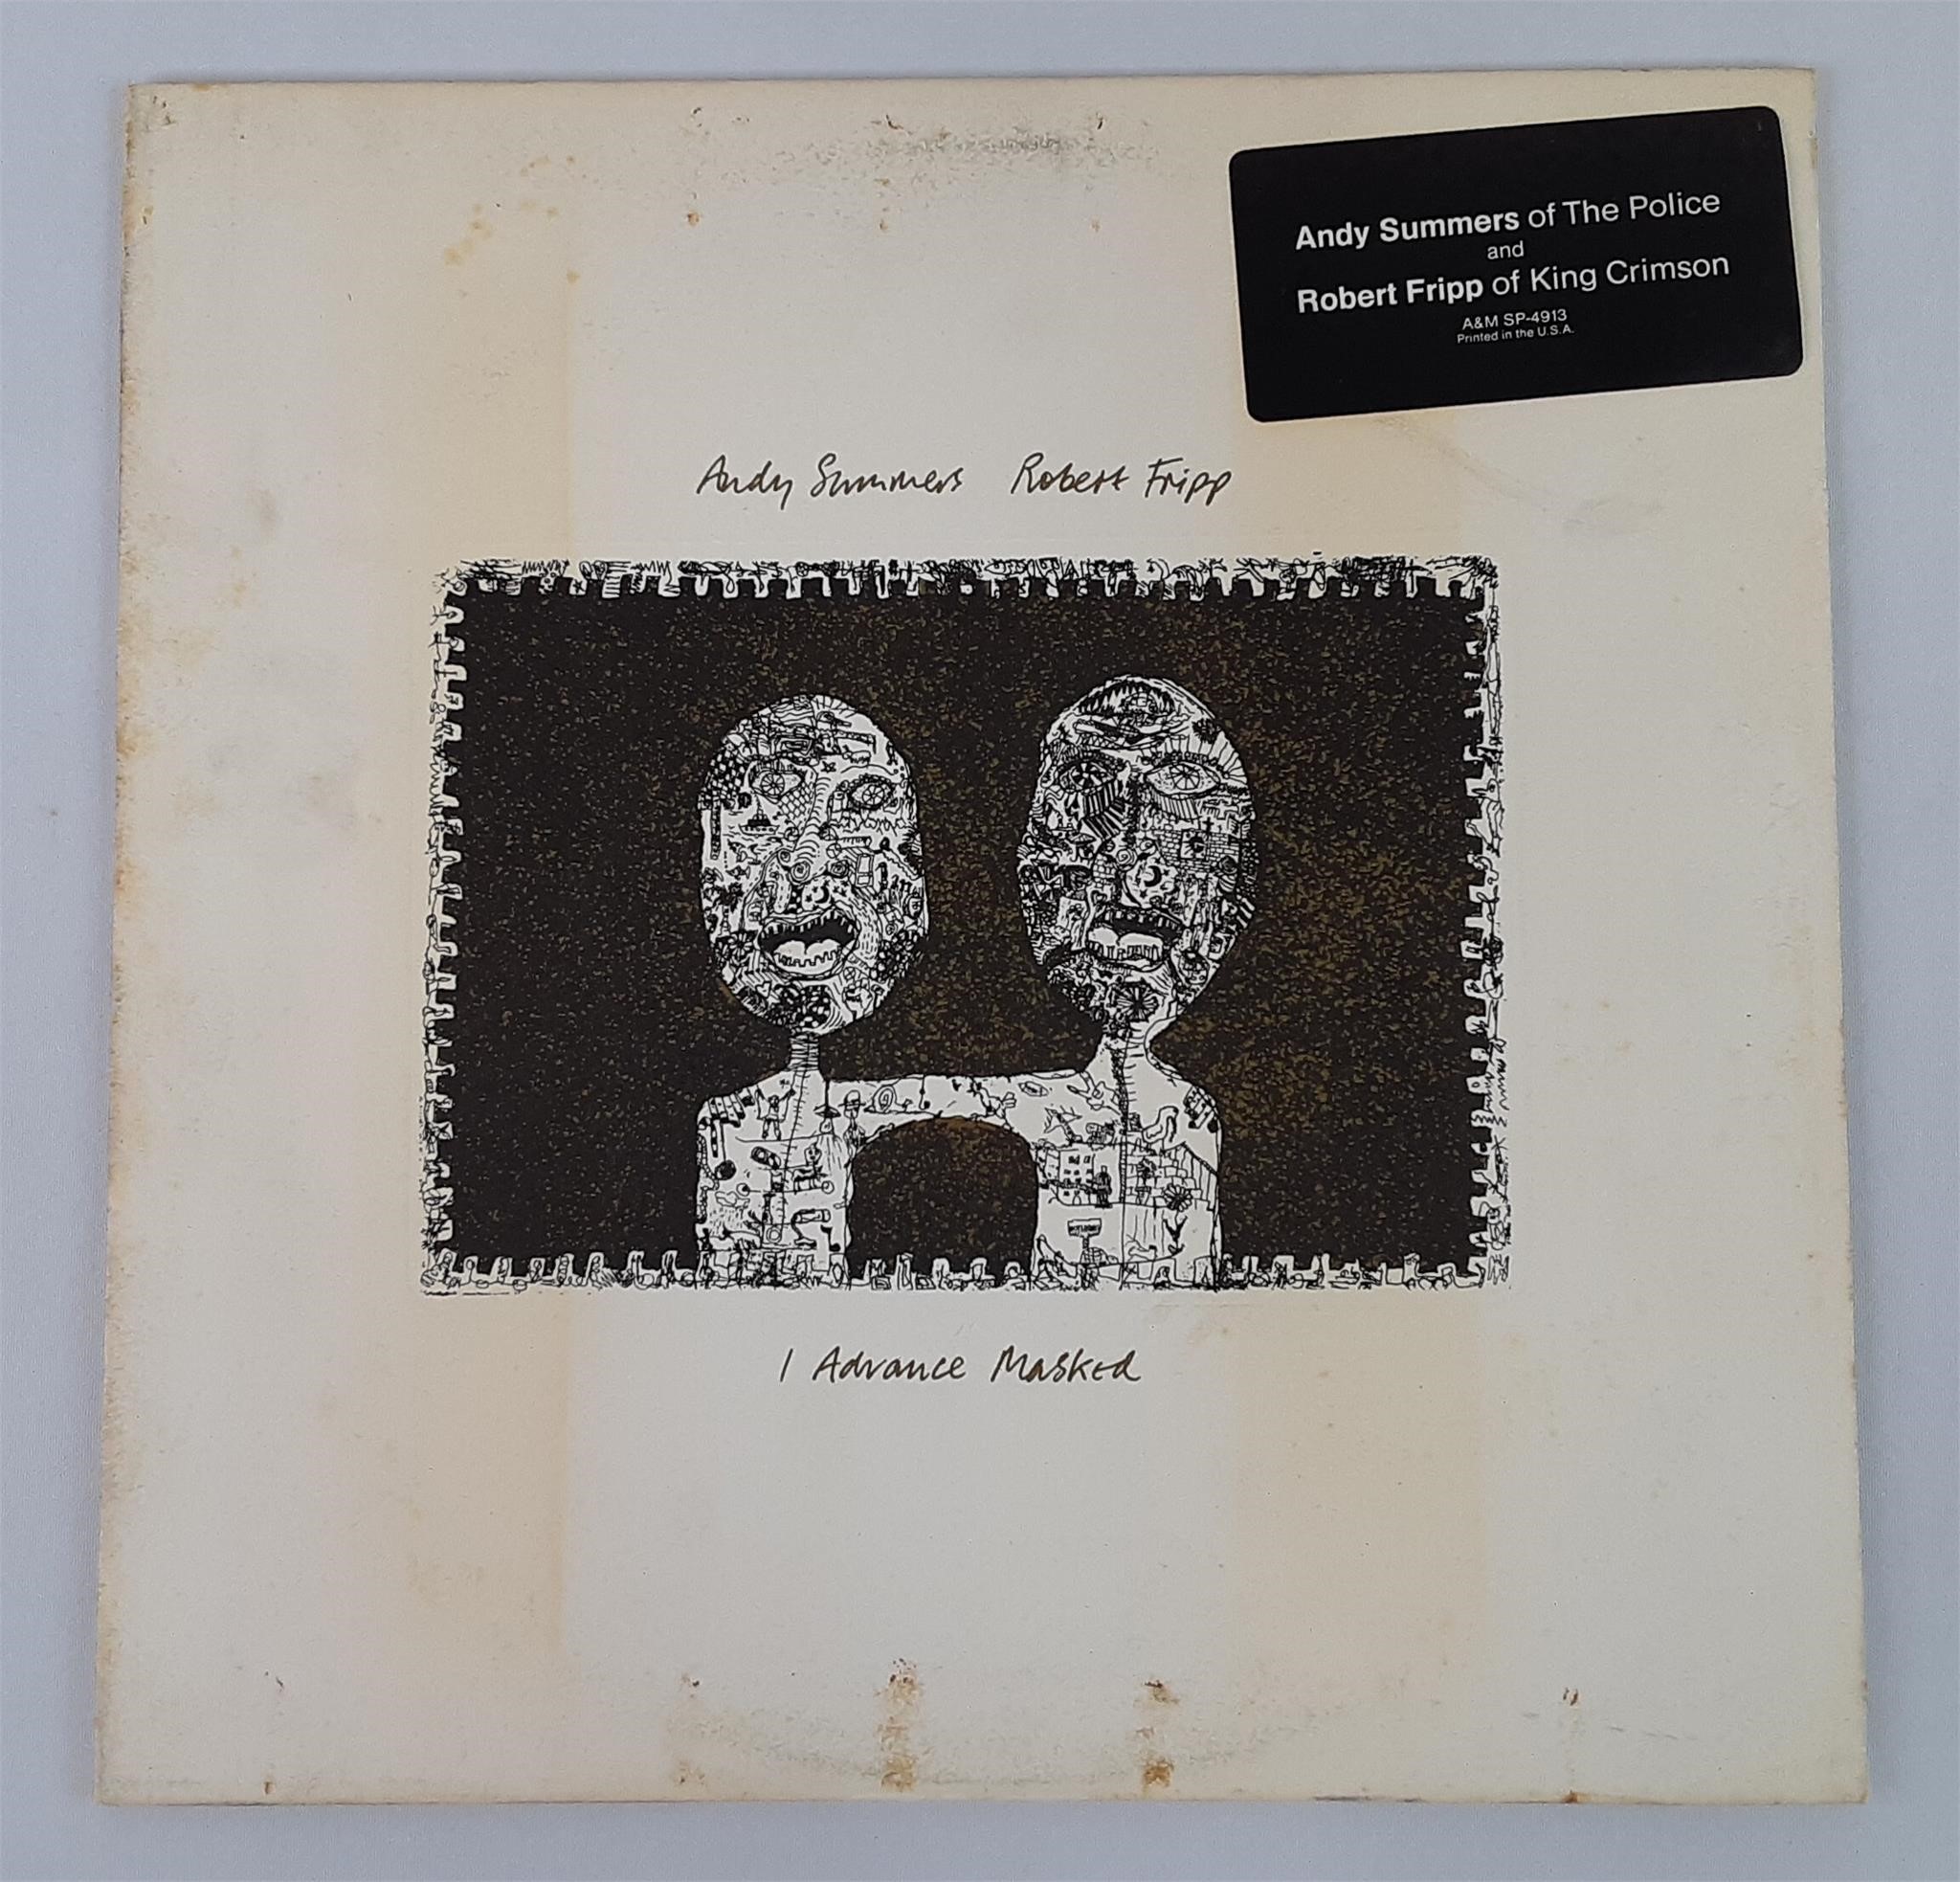 Andy Summers & Robert Fripp I Advance Masked